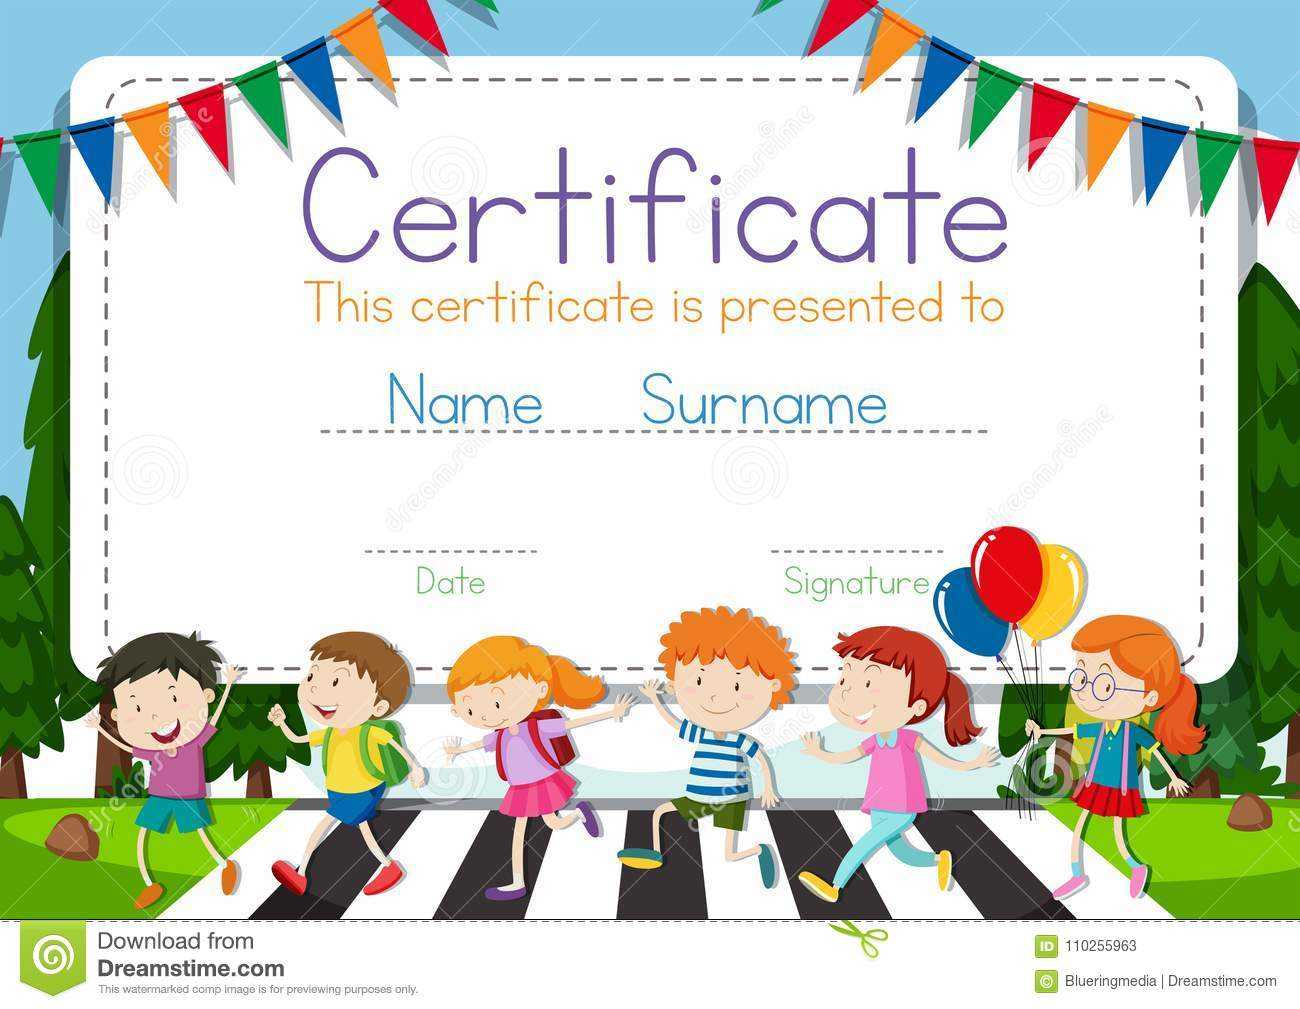 Certificate Template With Children Crossing Road Background With Regard To Crossing The Line Certificate Template